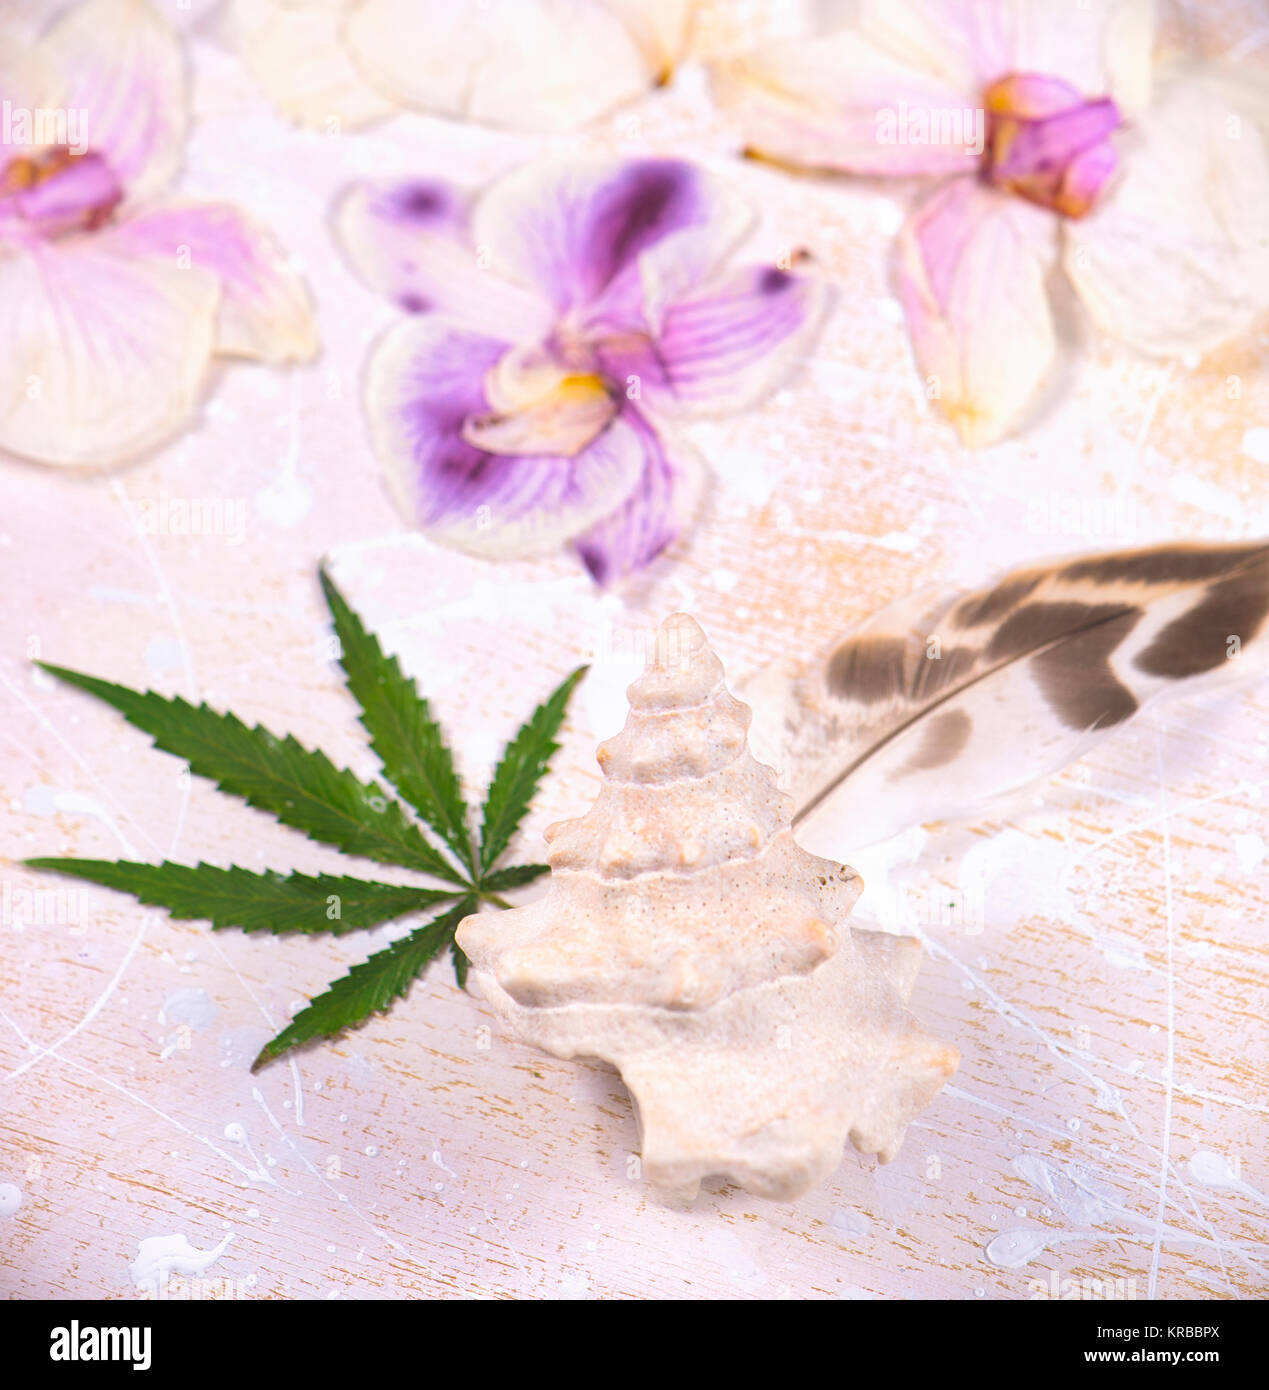 Cannabis leaves, shells and dried pink orquid petals isolated over white background - marijuana spa concept Stock Photo